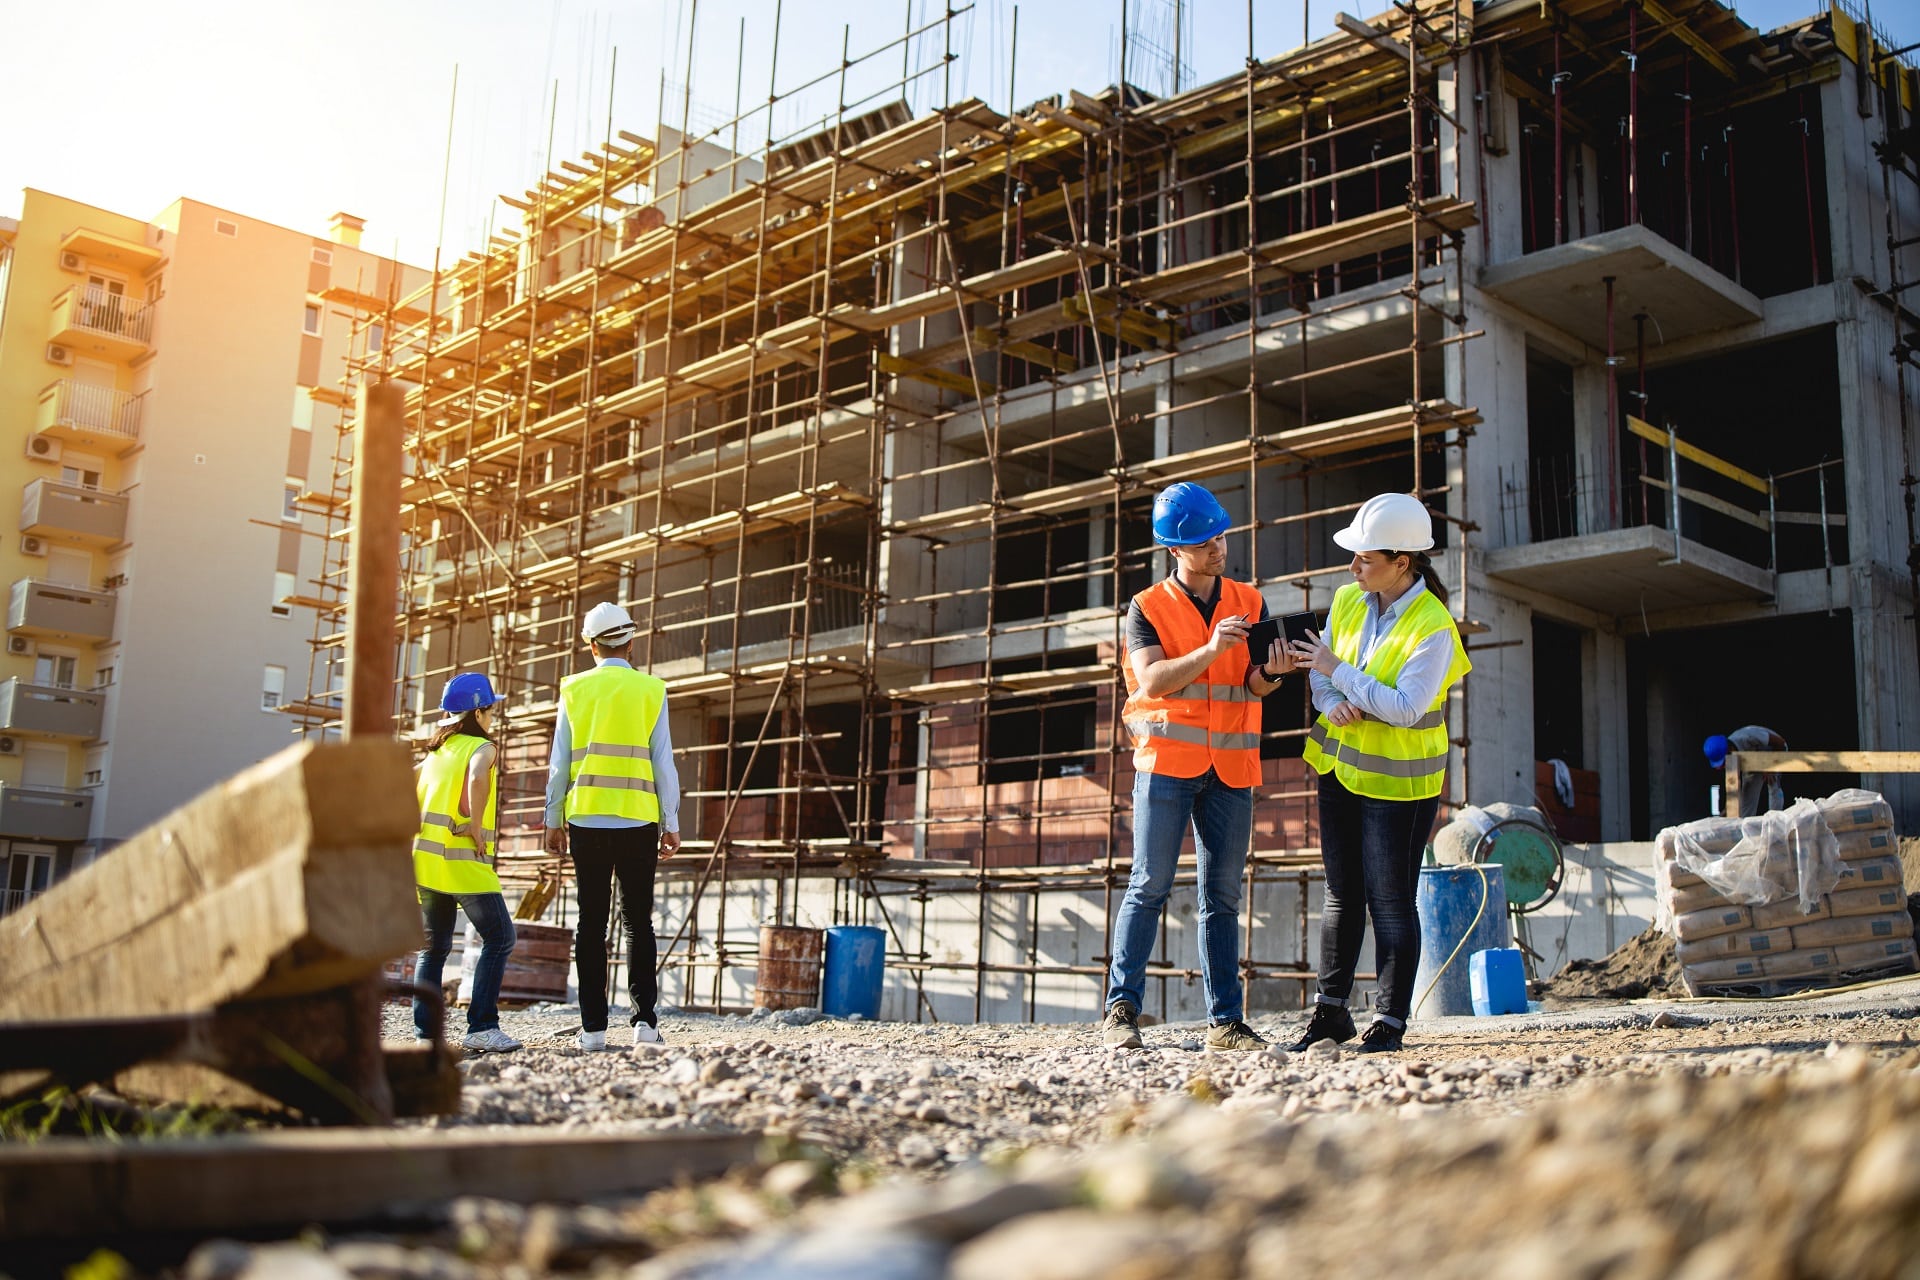 Meeting of Construction Workers On Site | Construction Accidents Lawyer | Gash & Associates, P.C.